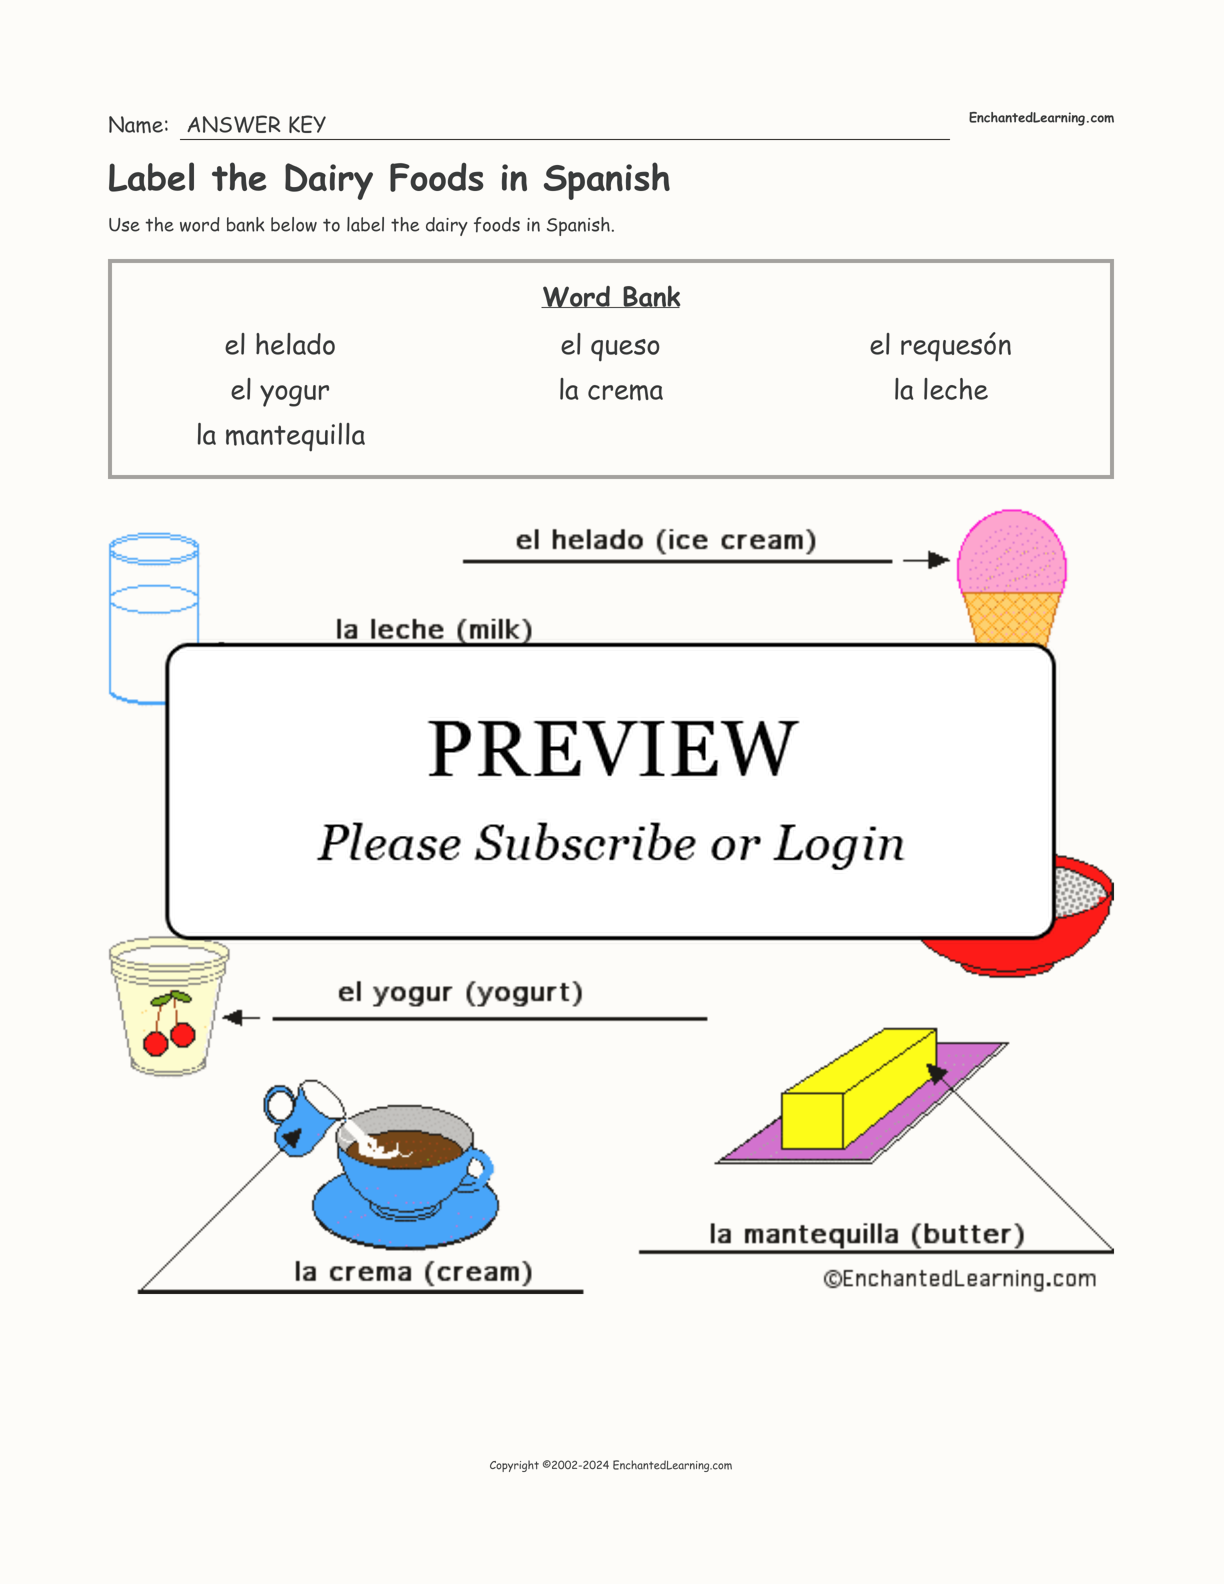 Label the Dairy Foods in Spanish interactive worksheet page 2